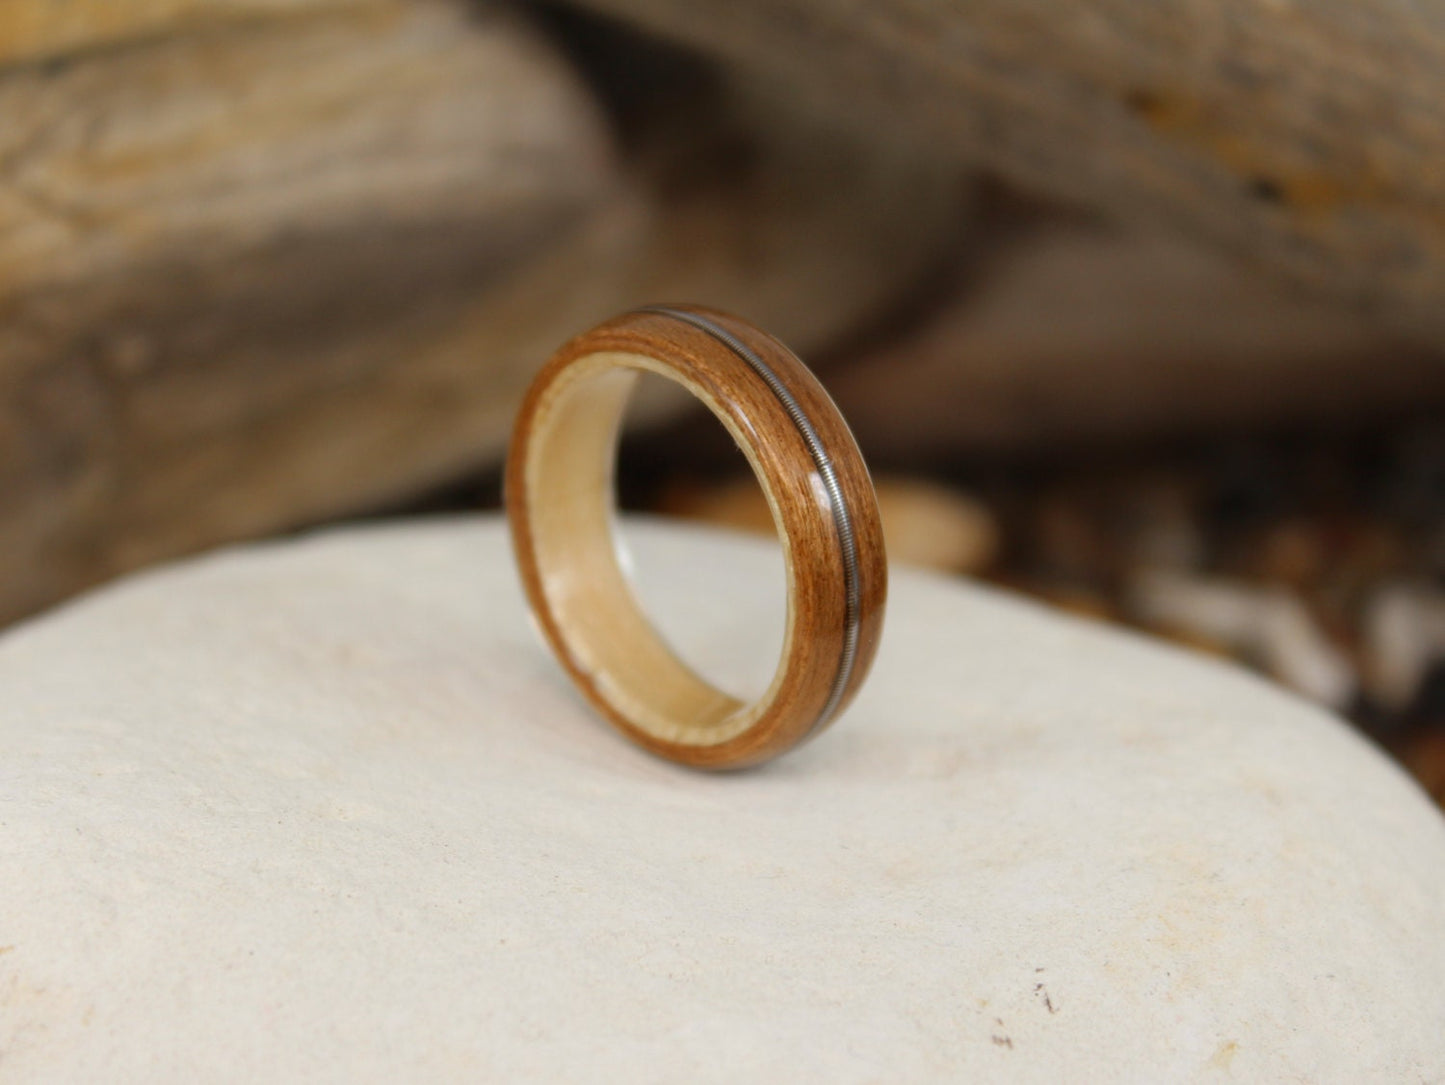 Cherry and Sycamore Bent Wood Ring with a Guitar String Inlay